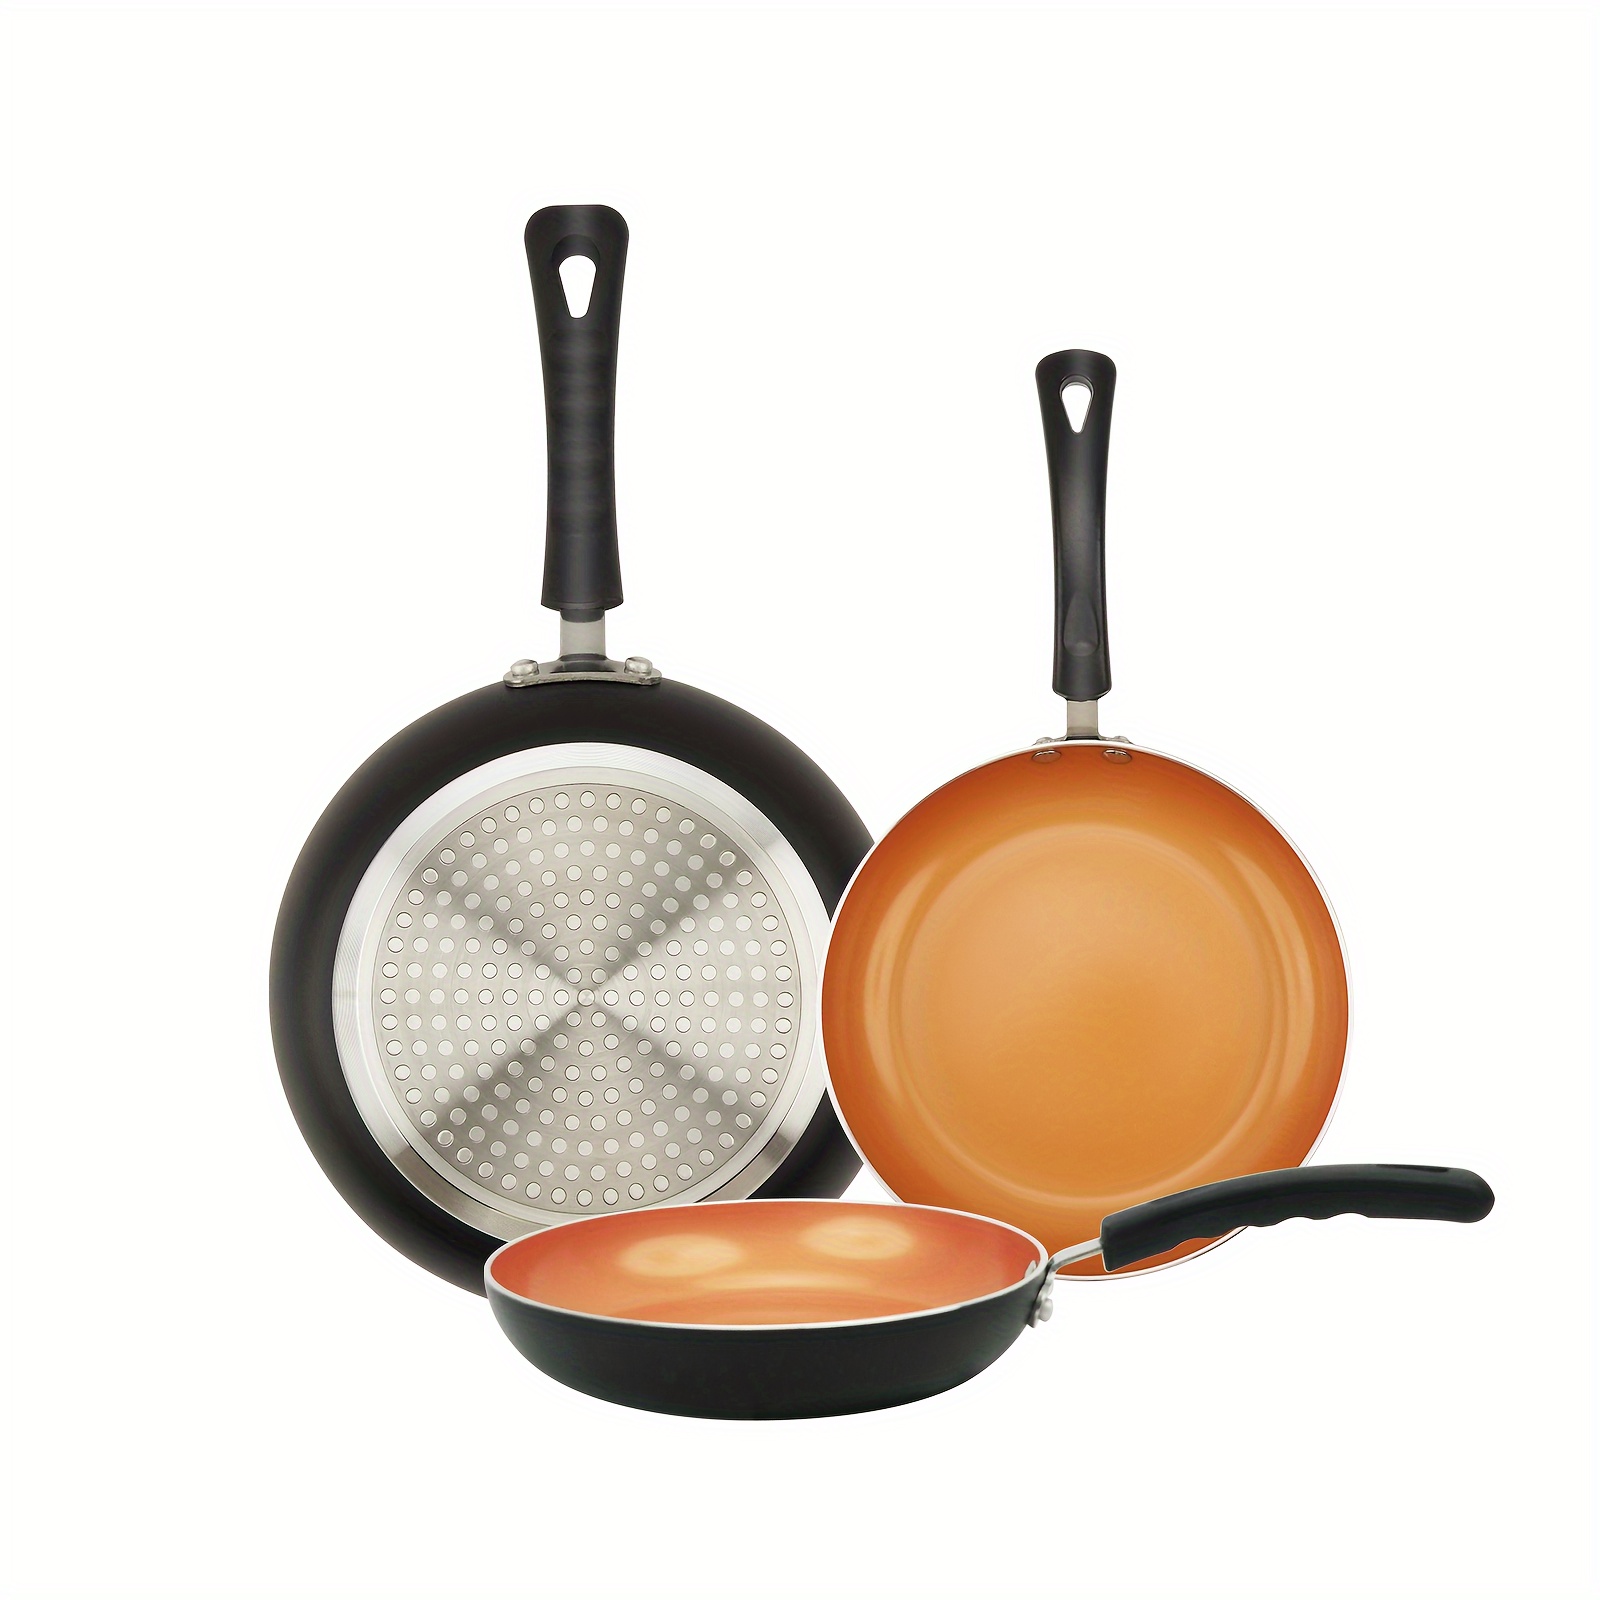 

Set Of 3 Nonstick Frying Pan Set, Non Stick Frying Pans, Golden Ceremic Induction Cookware, 8inch&9.5inch&11inch Skillet Omelette Egg Frying Pan Set, Kitchen Cooking Pan Set, Pfoa&pfas Free